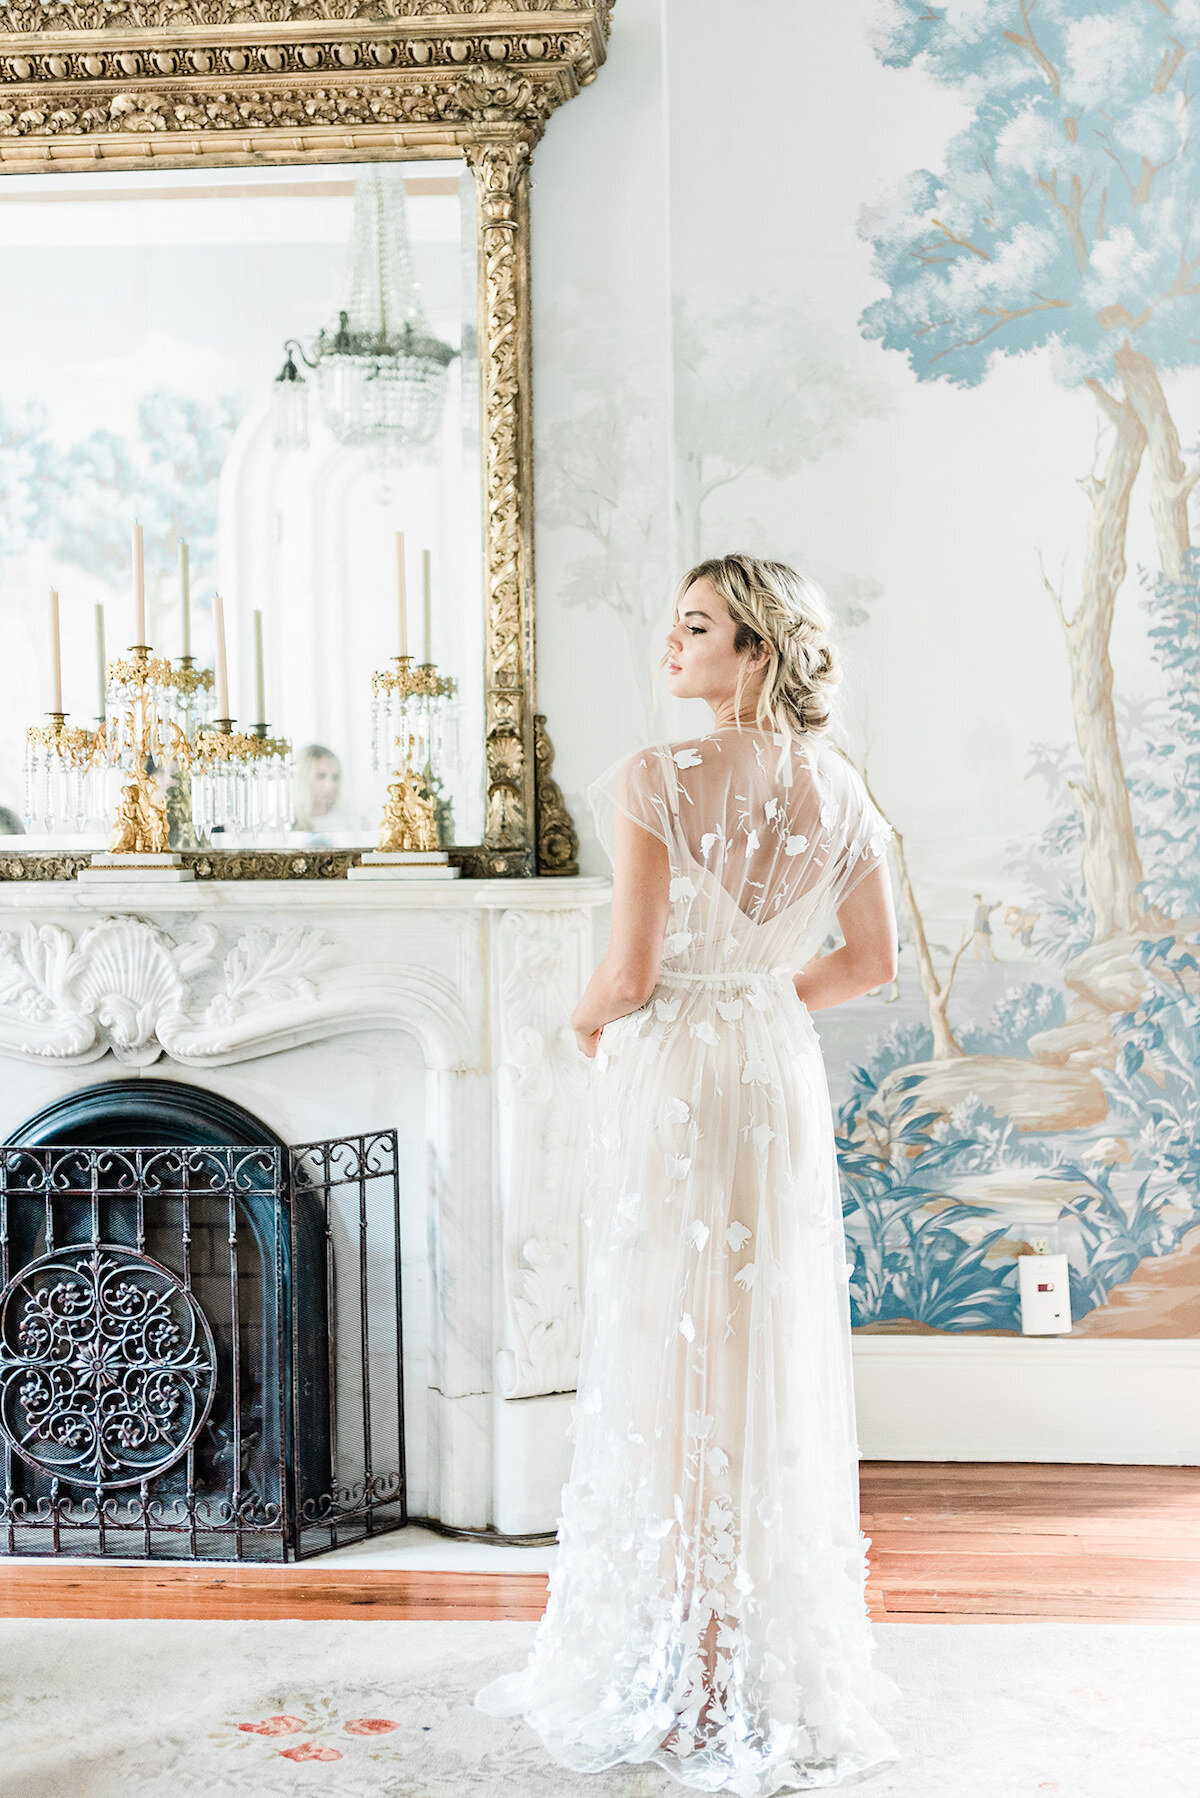 Discover the magic of couture bridal photography with a high-end touch. Our images fashion dreams into reality, portraying the beauty and craftsmanship of each bridal masterpiece.